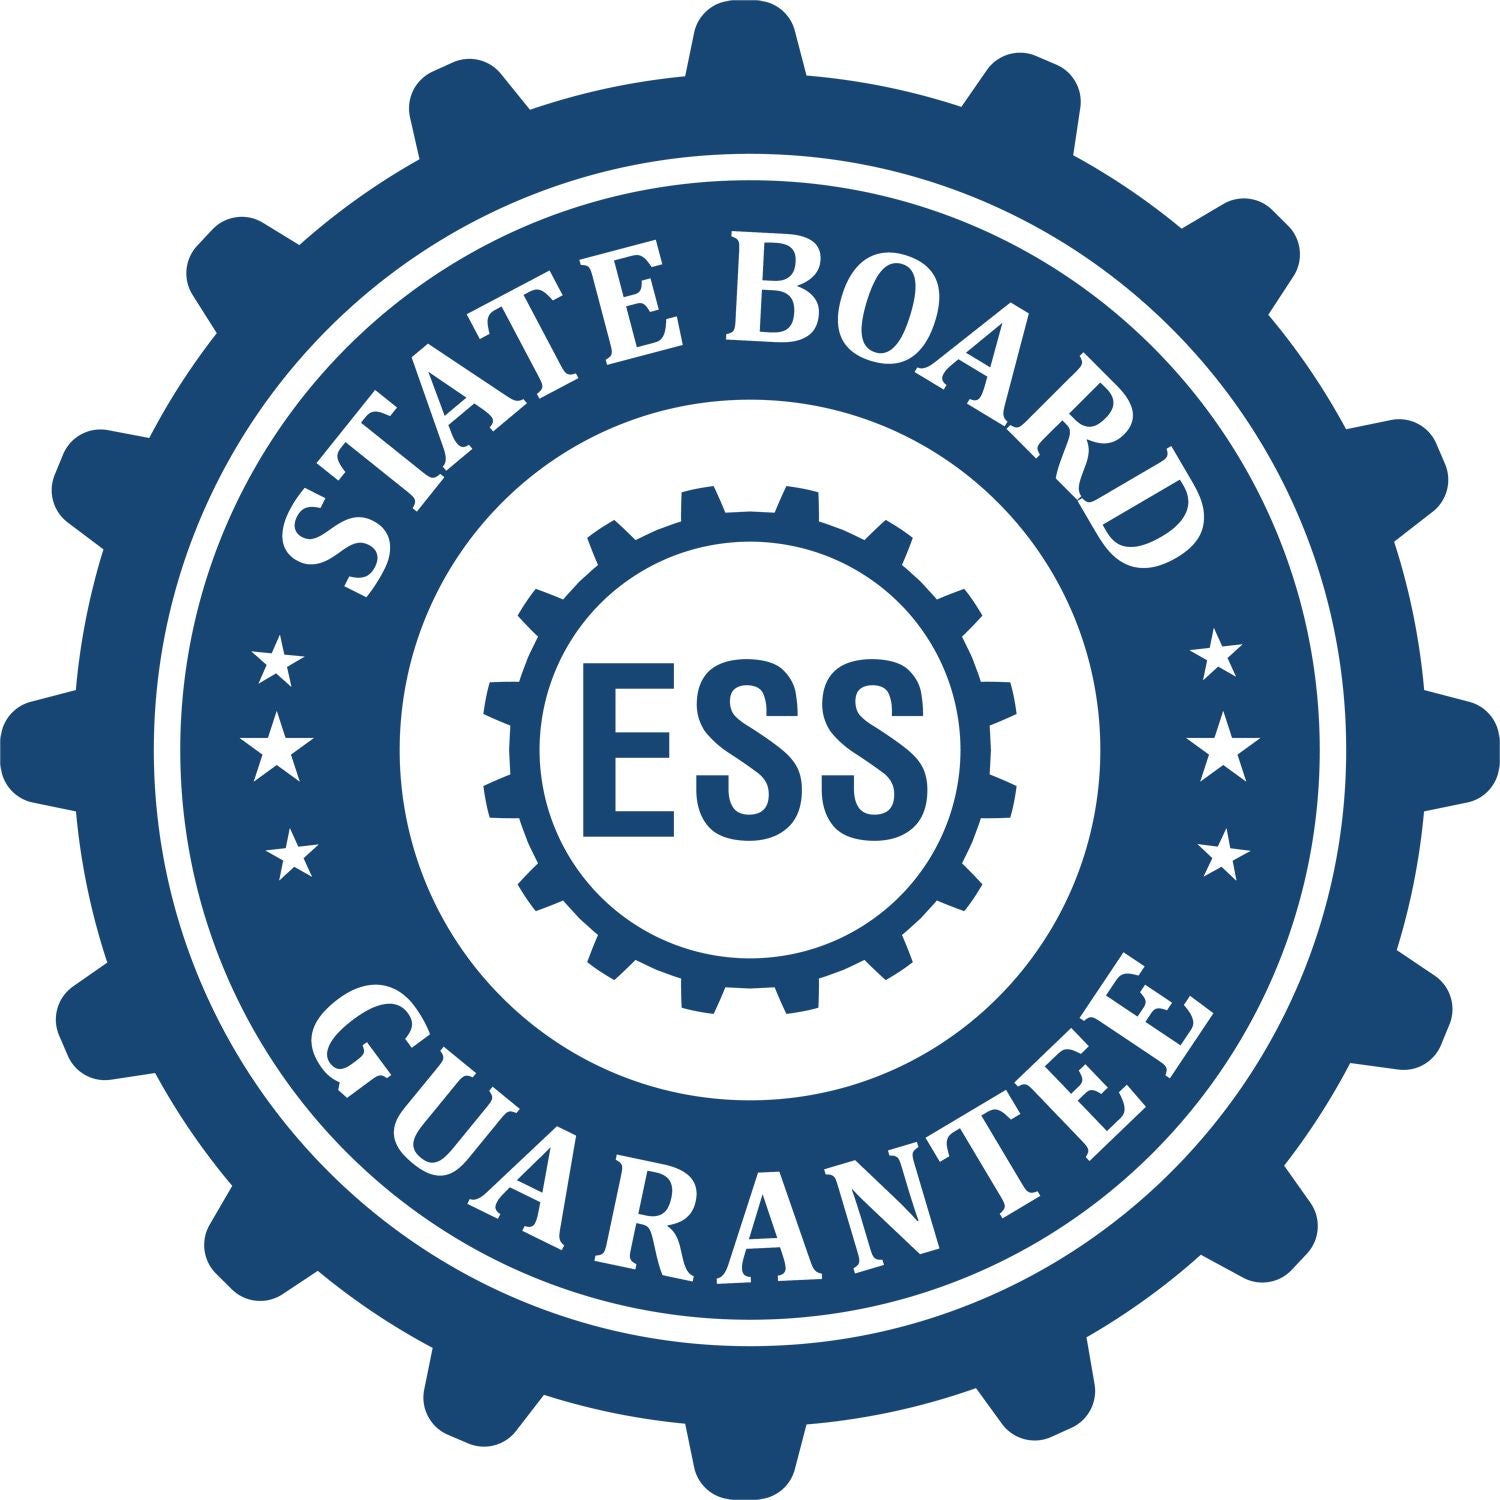 An emblem in a gear shape illustrating a state board guarantee for the State of Arkansas Long Reach Architectural Embossing Seal product.